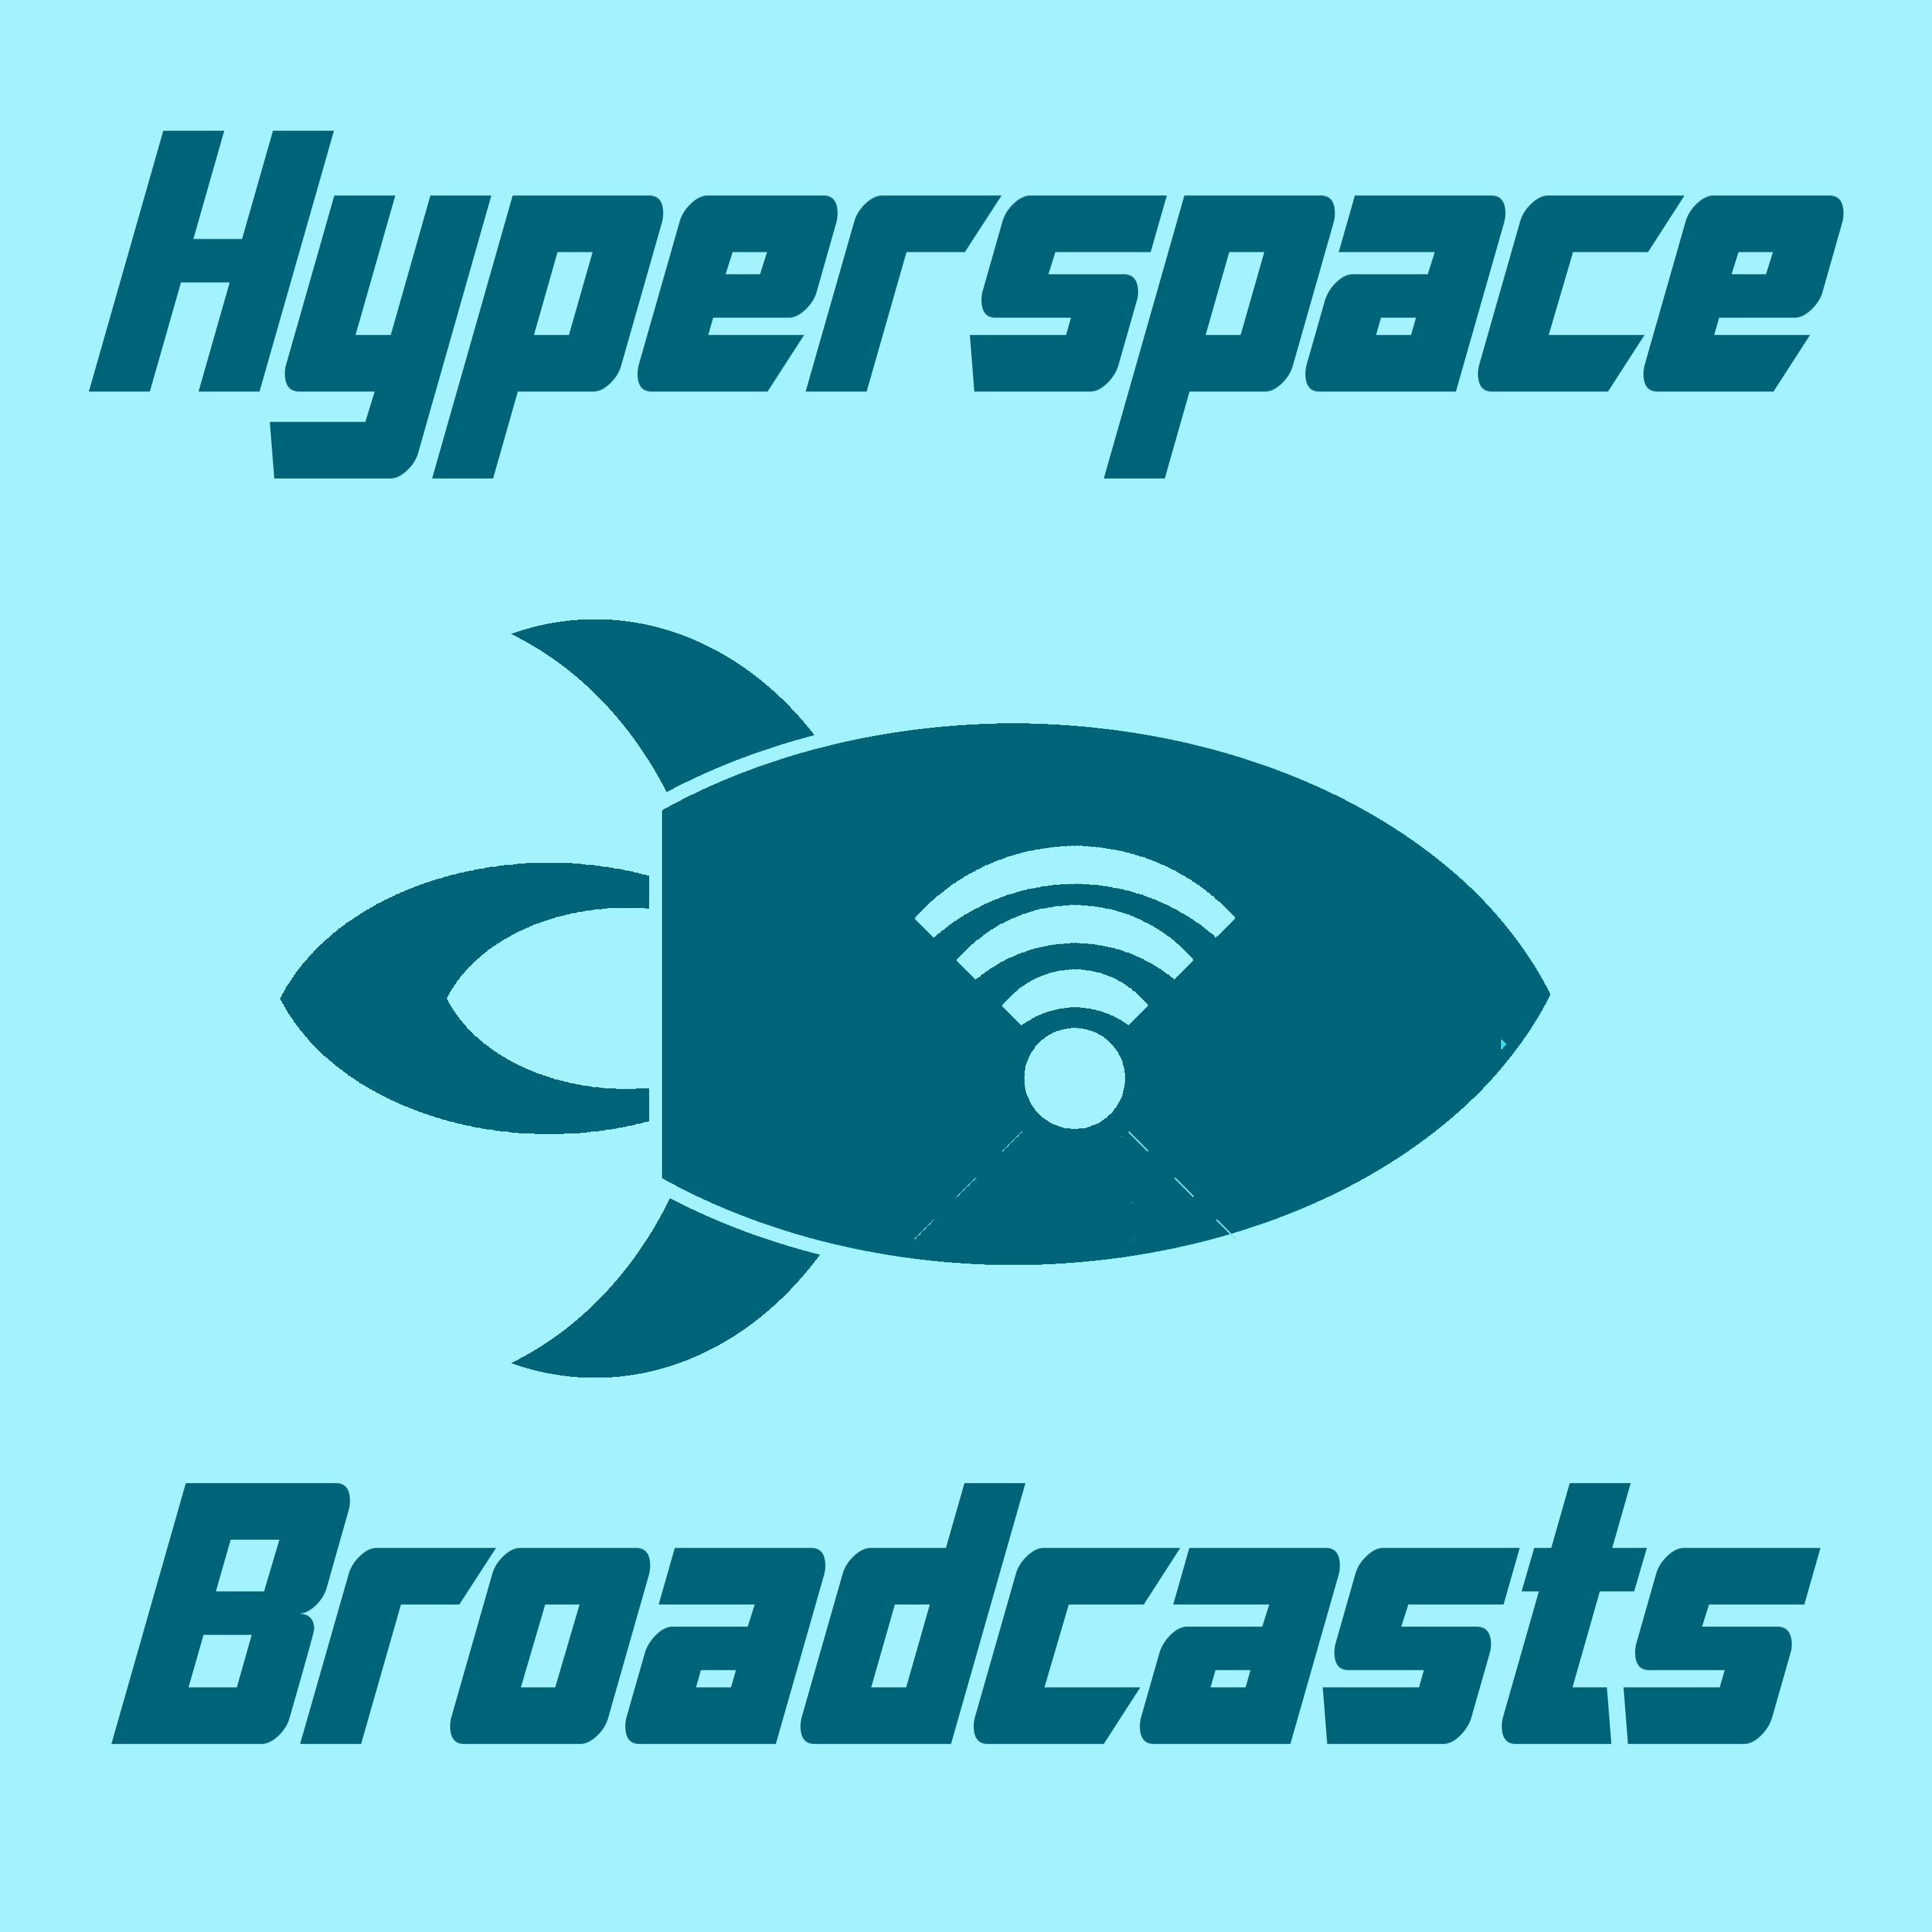 Hyperspace Broadcasts